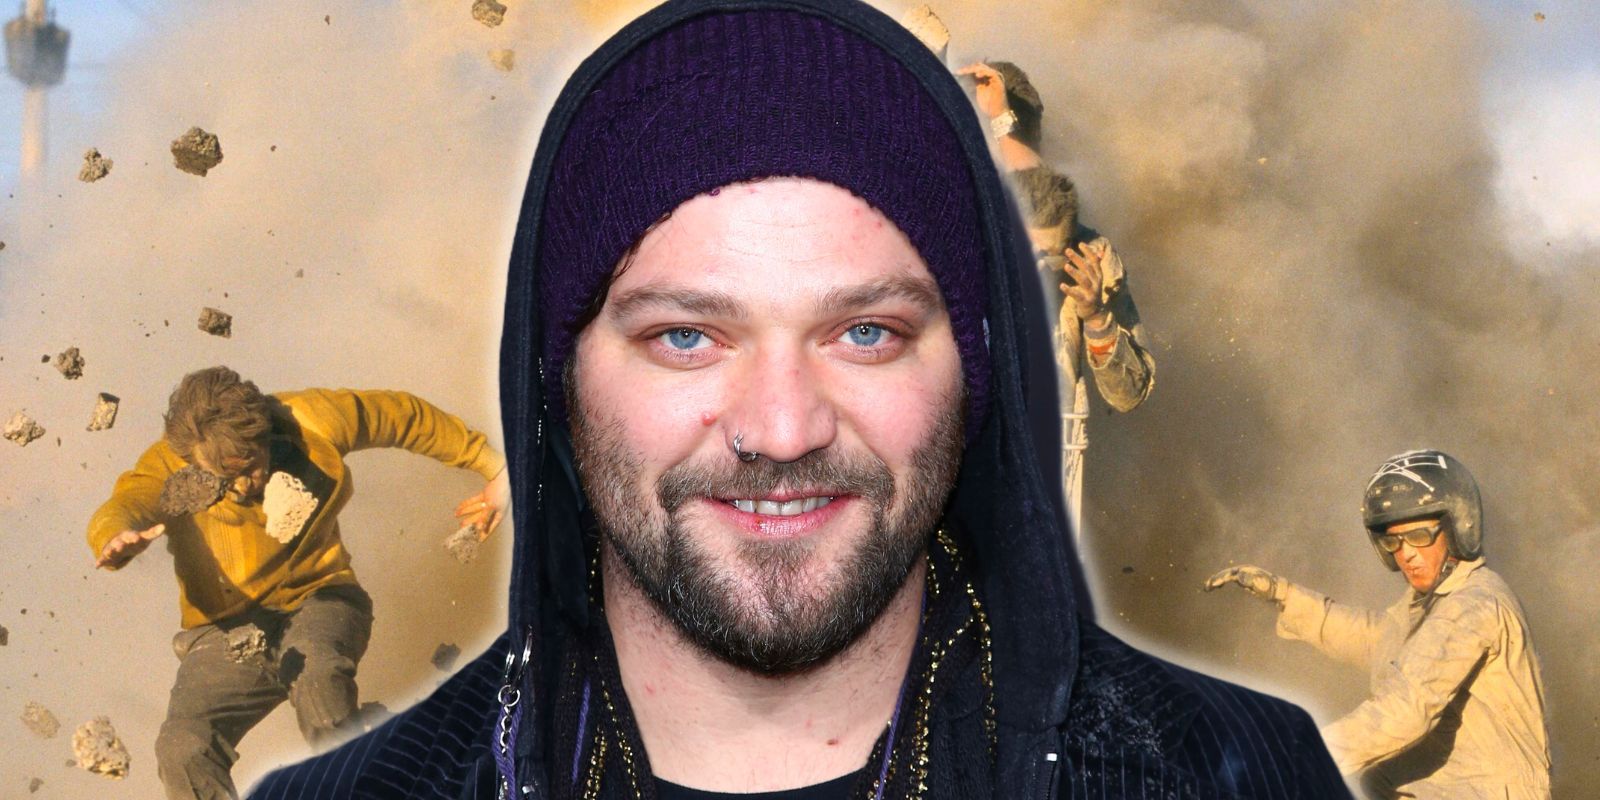 Bam Margera in front of a sandy explosion